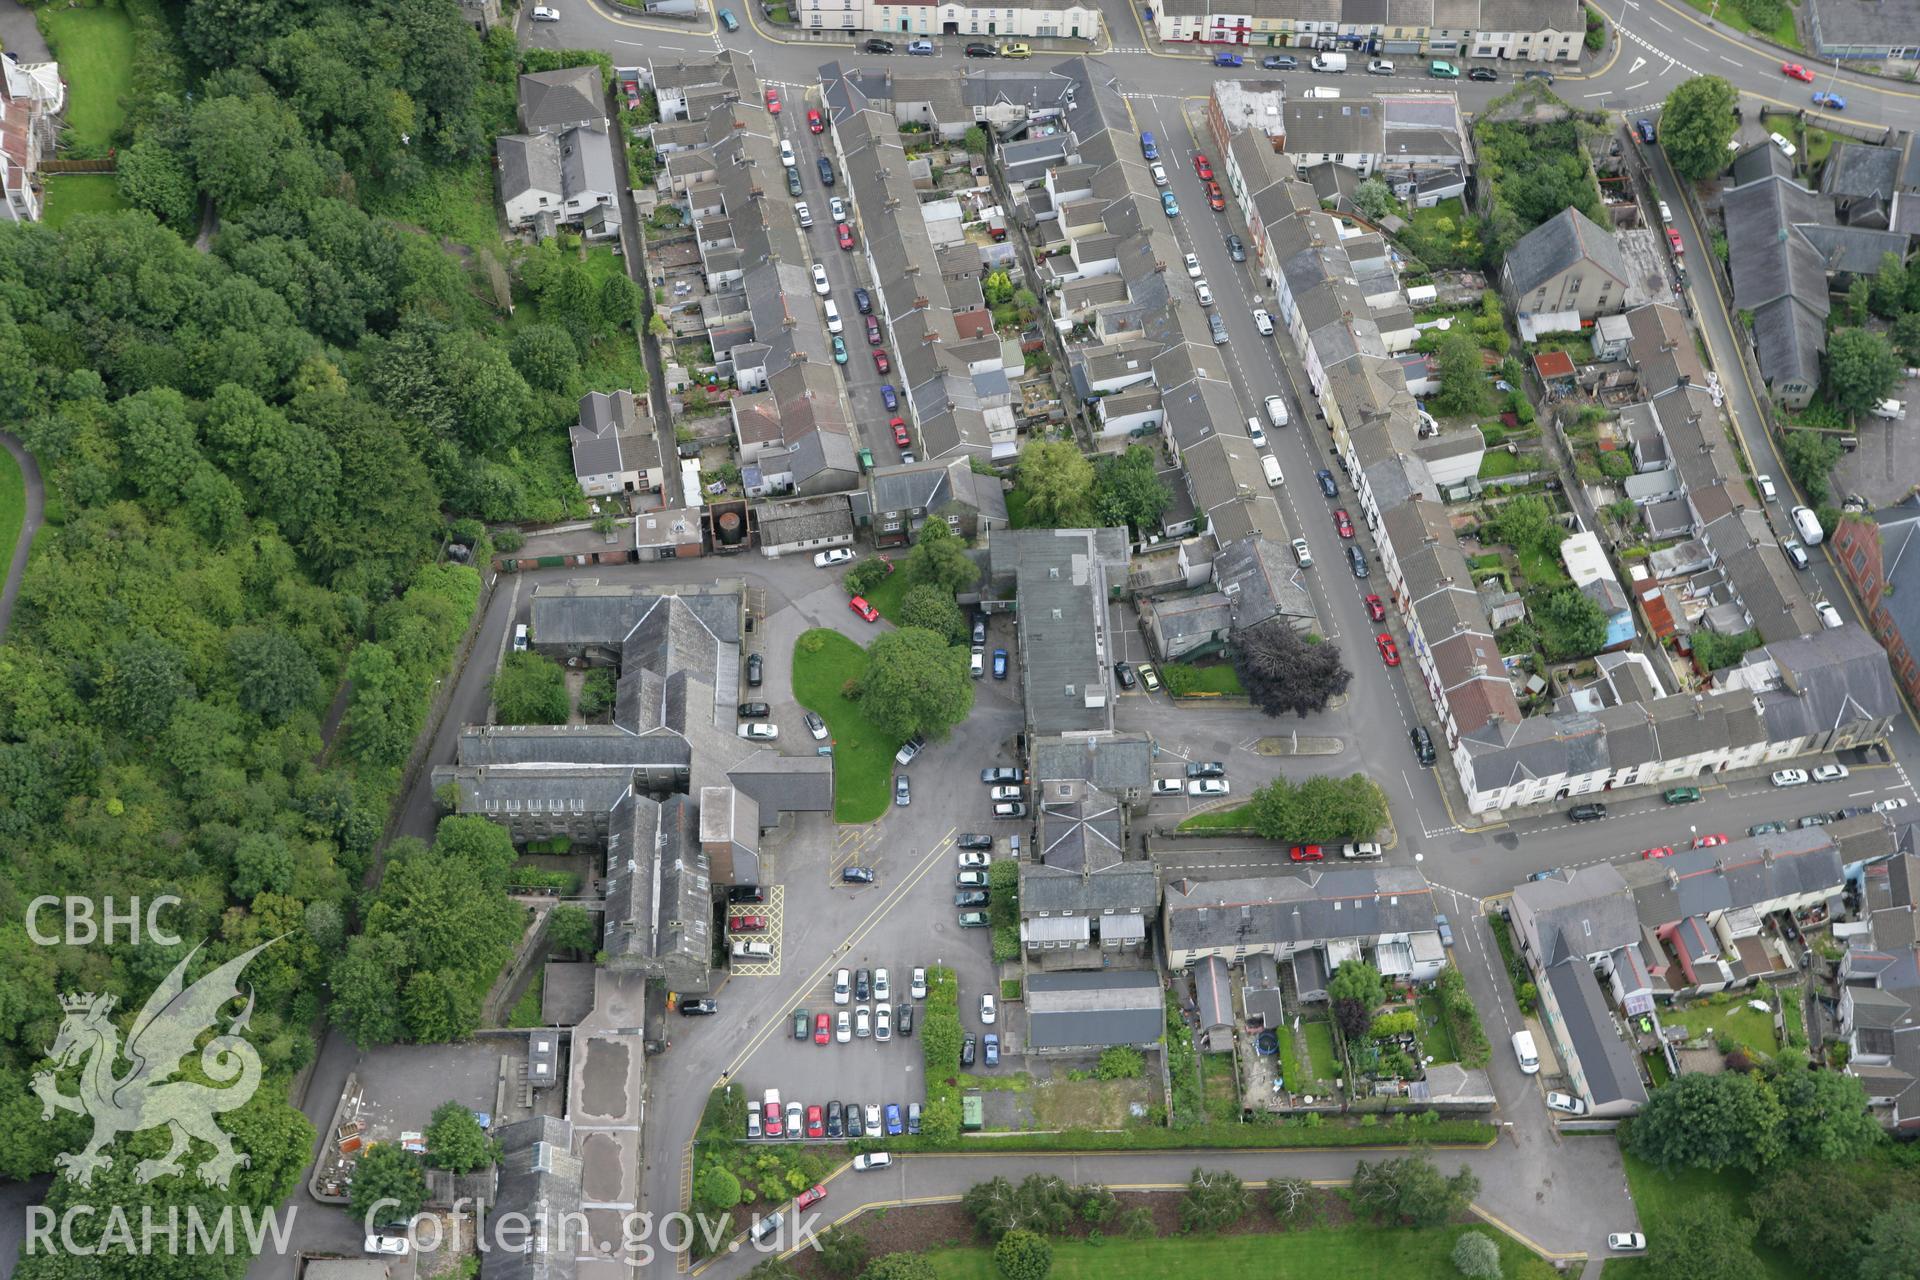 RCAHMW colour oblique aerial photograph of St Tydfils Hospital. Taken on 30 July 2007 by Toby Driver